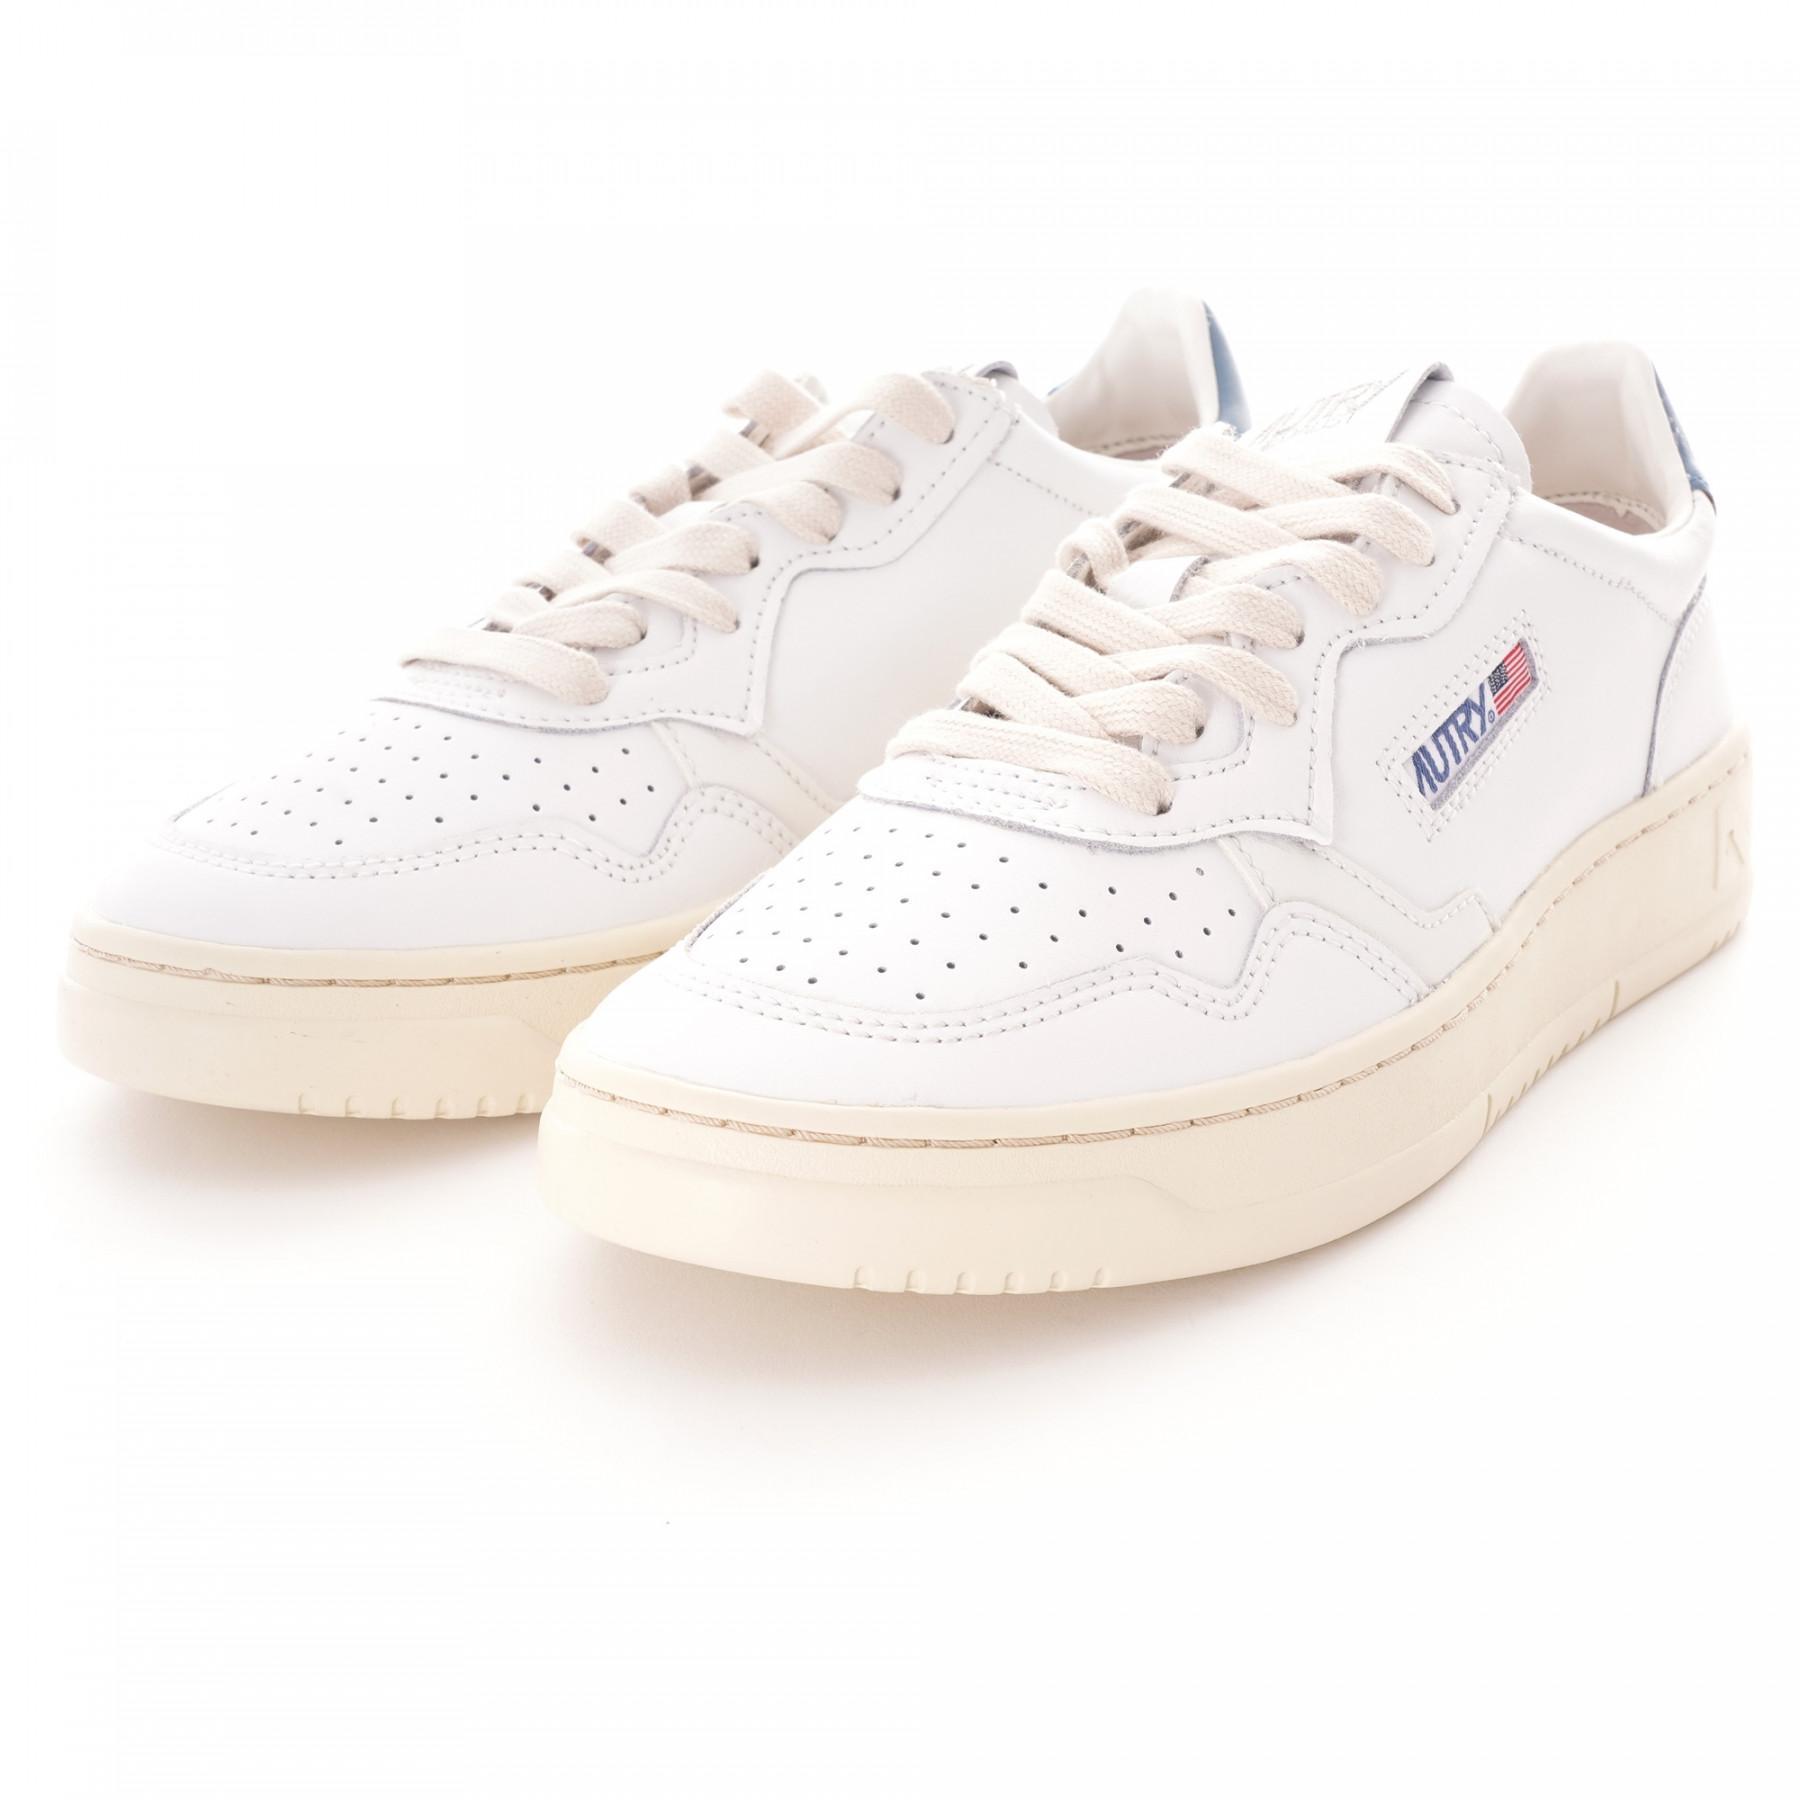 Baskets Autry Medalist LL18 Leather White/Navy